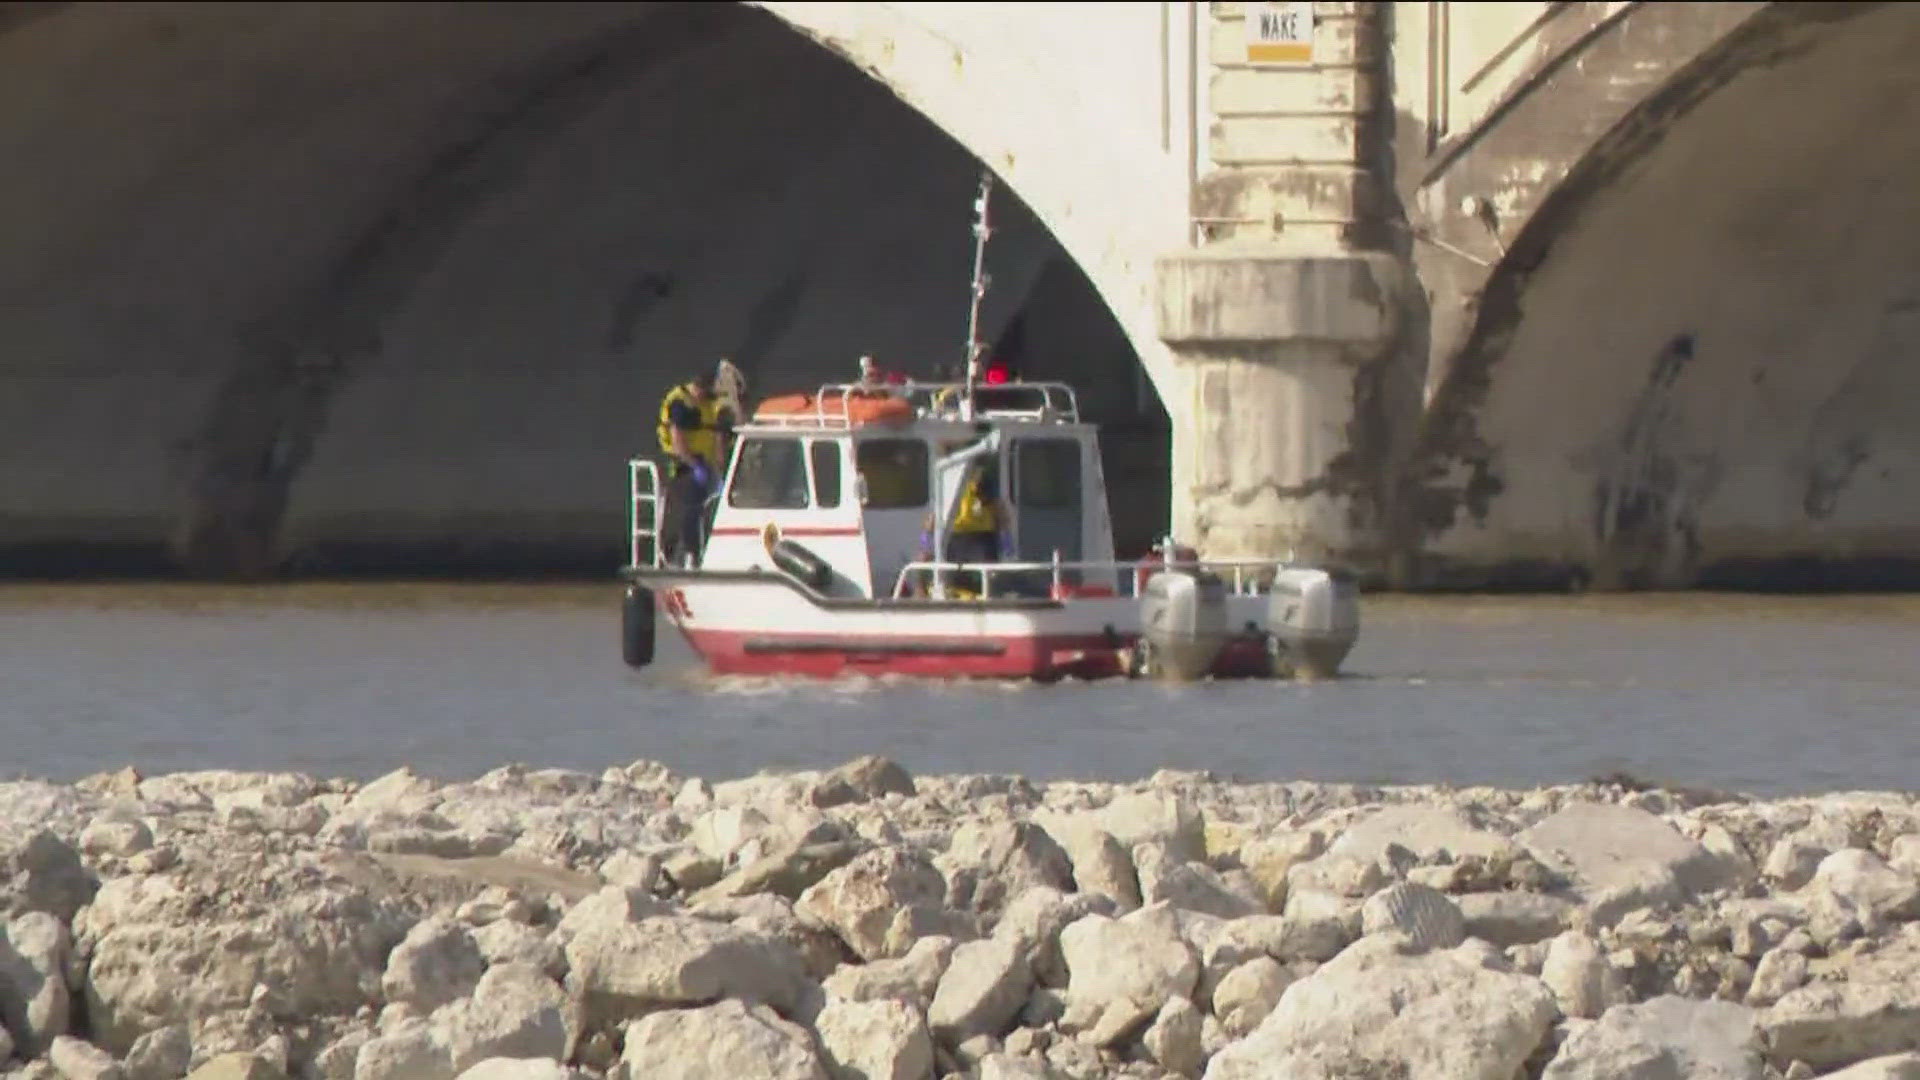 The body was found while Coast Guard crews were conducting training, police said in a report.